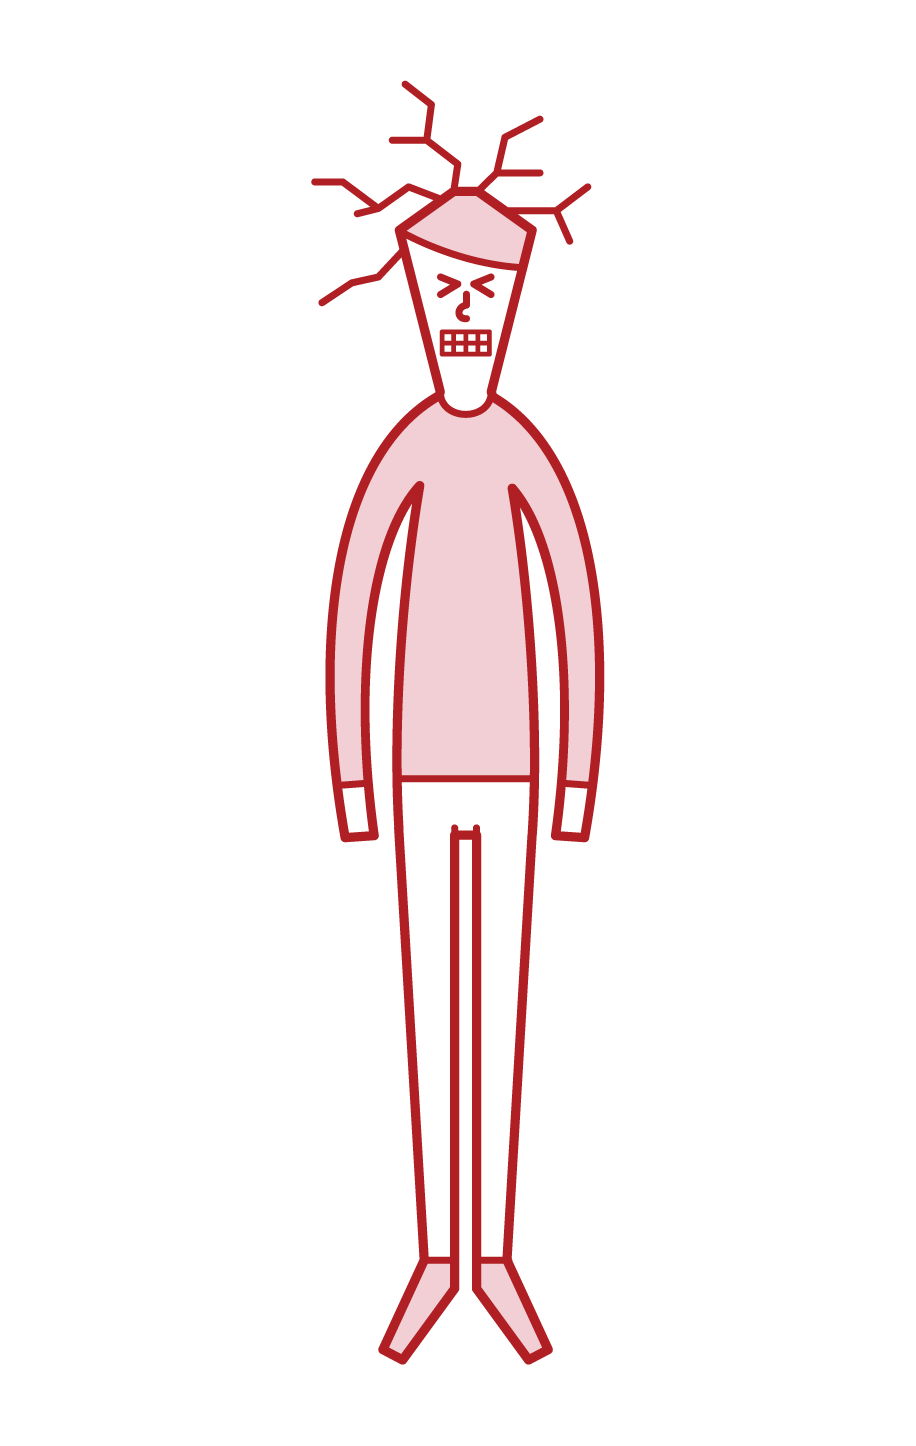 Illustration of a man hitting his head on the ceiling